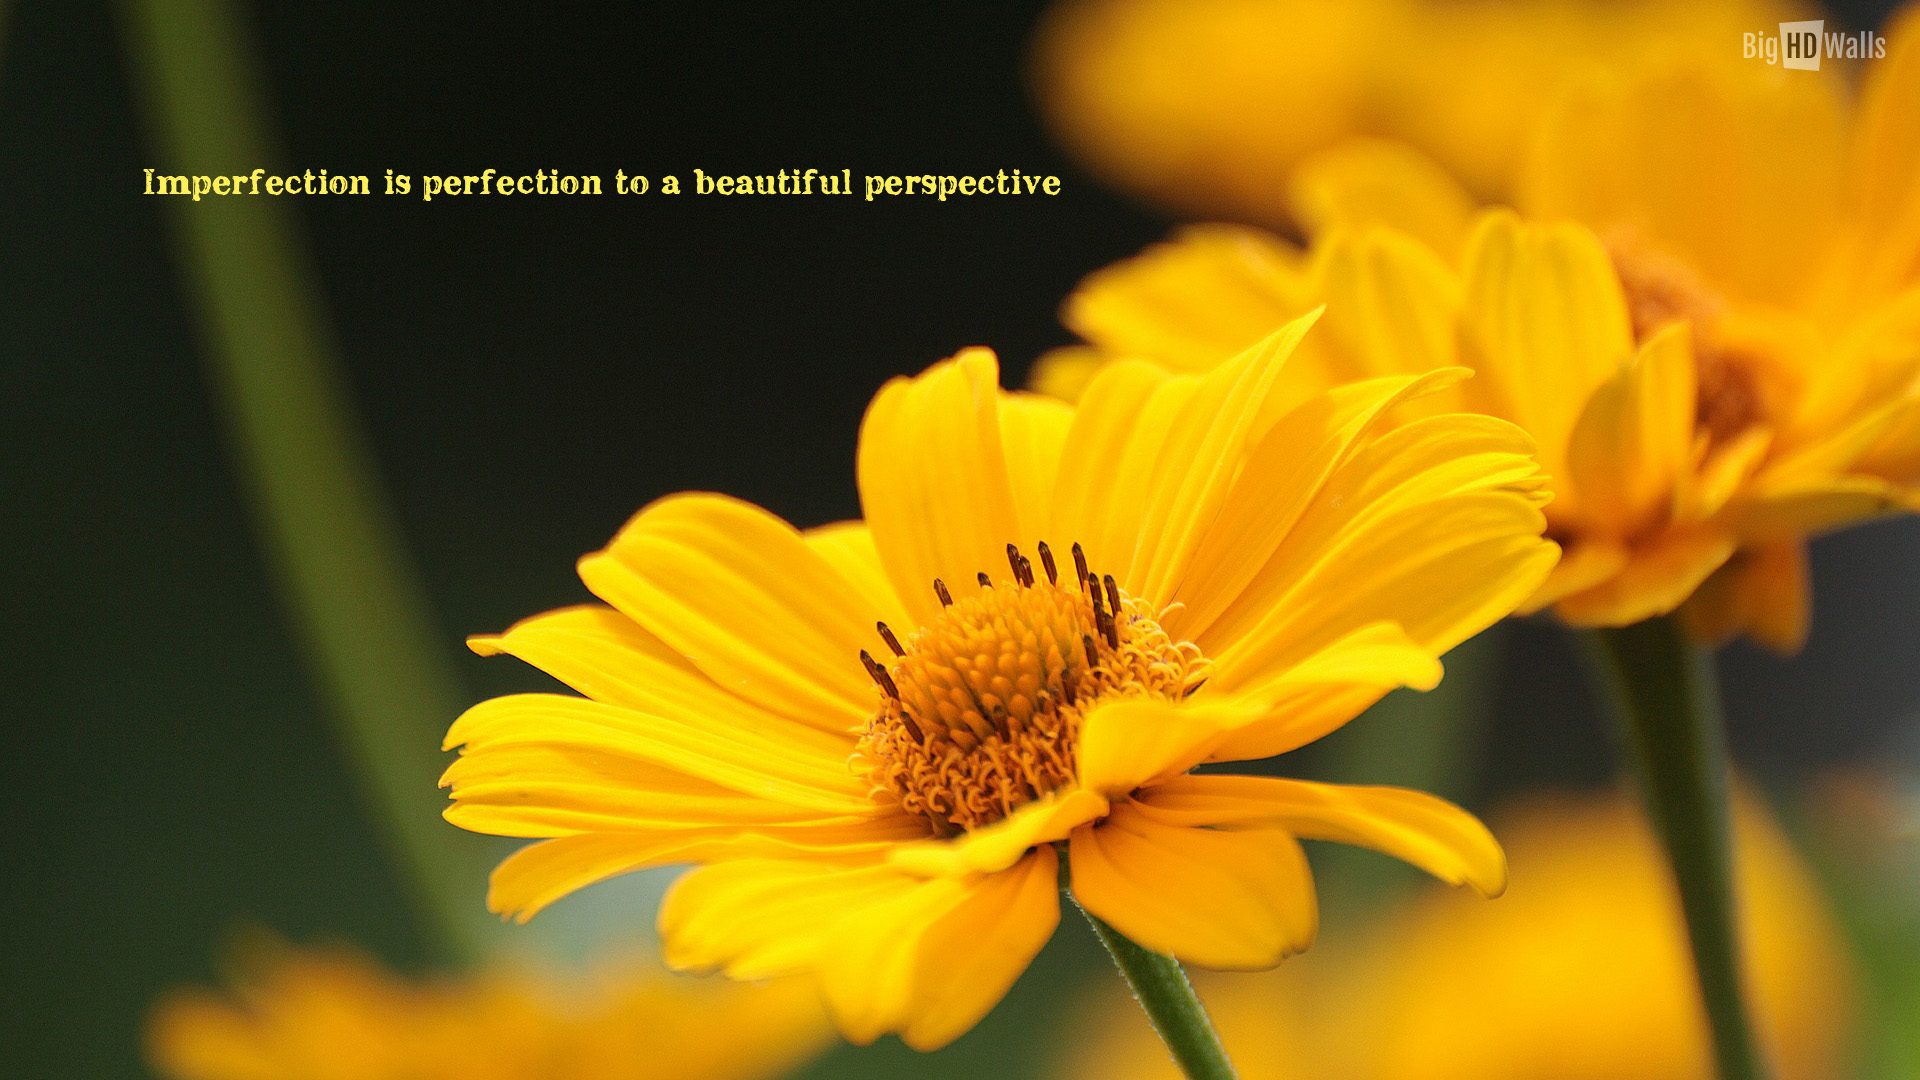 Beautiful Yellow Flower With An Awesome Quote Click On Image To